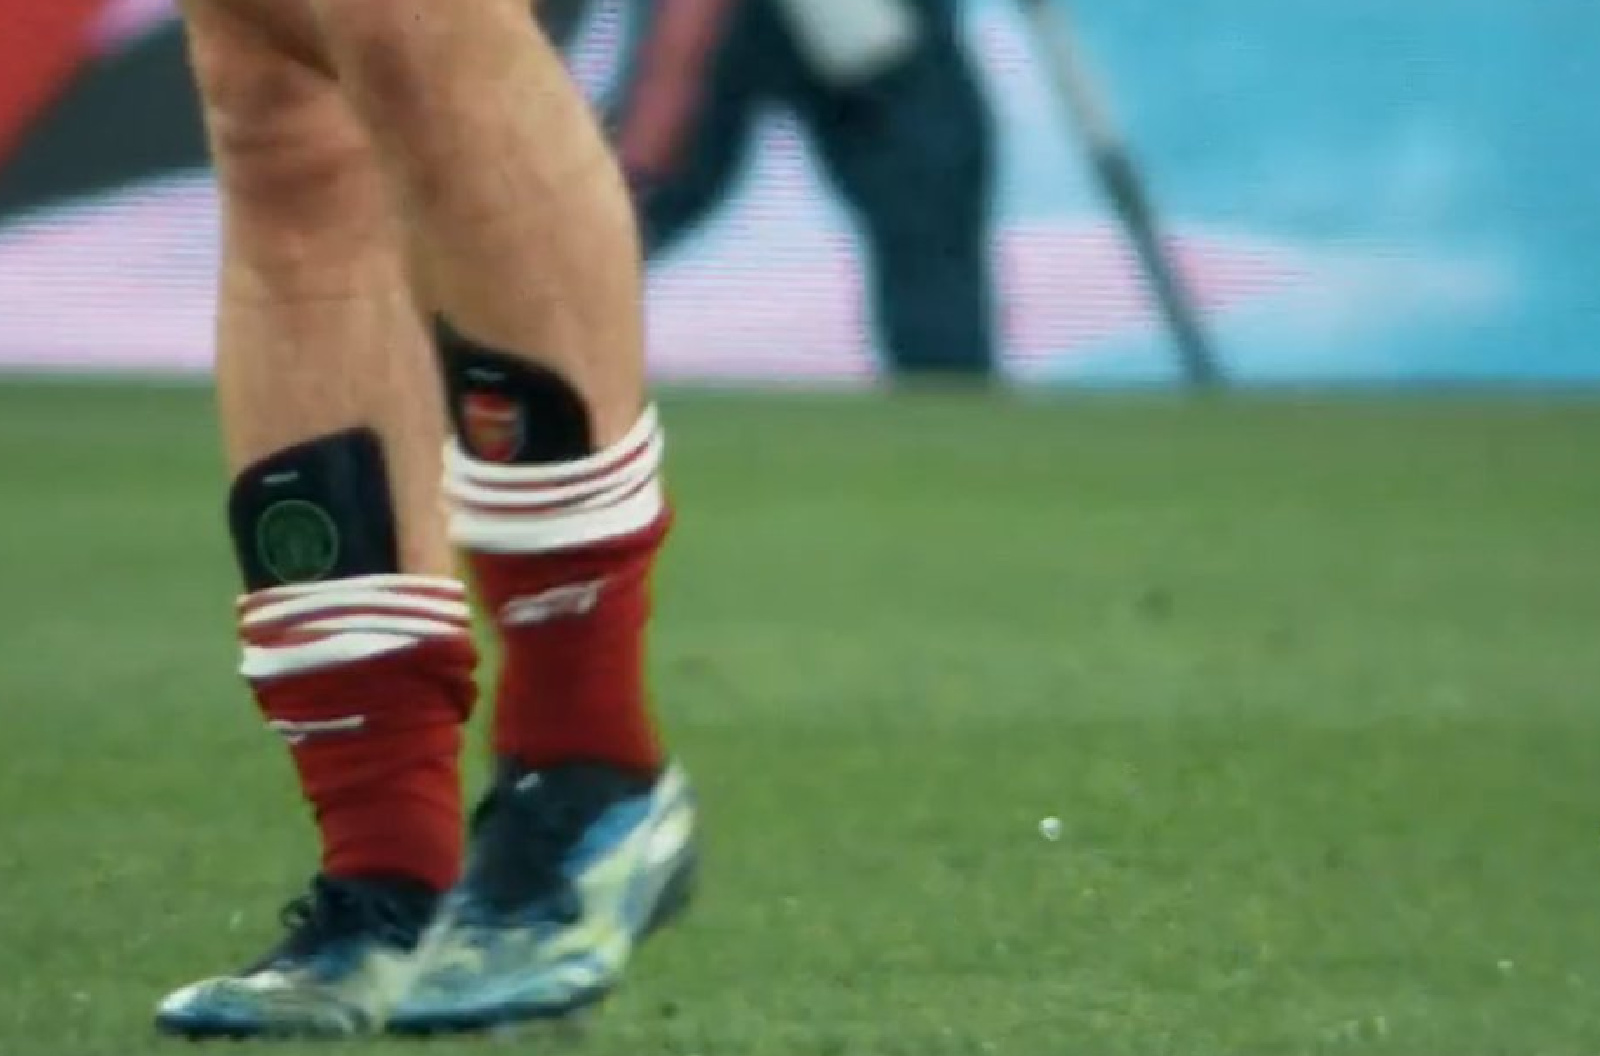 Kieran Tierney shows loyalty to Celtic with his choice of shin pad during NLD